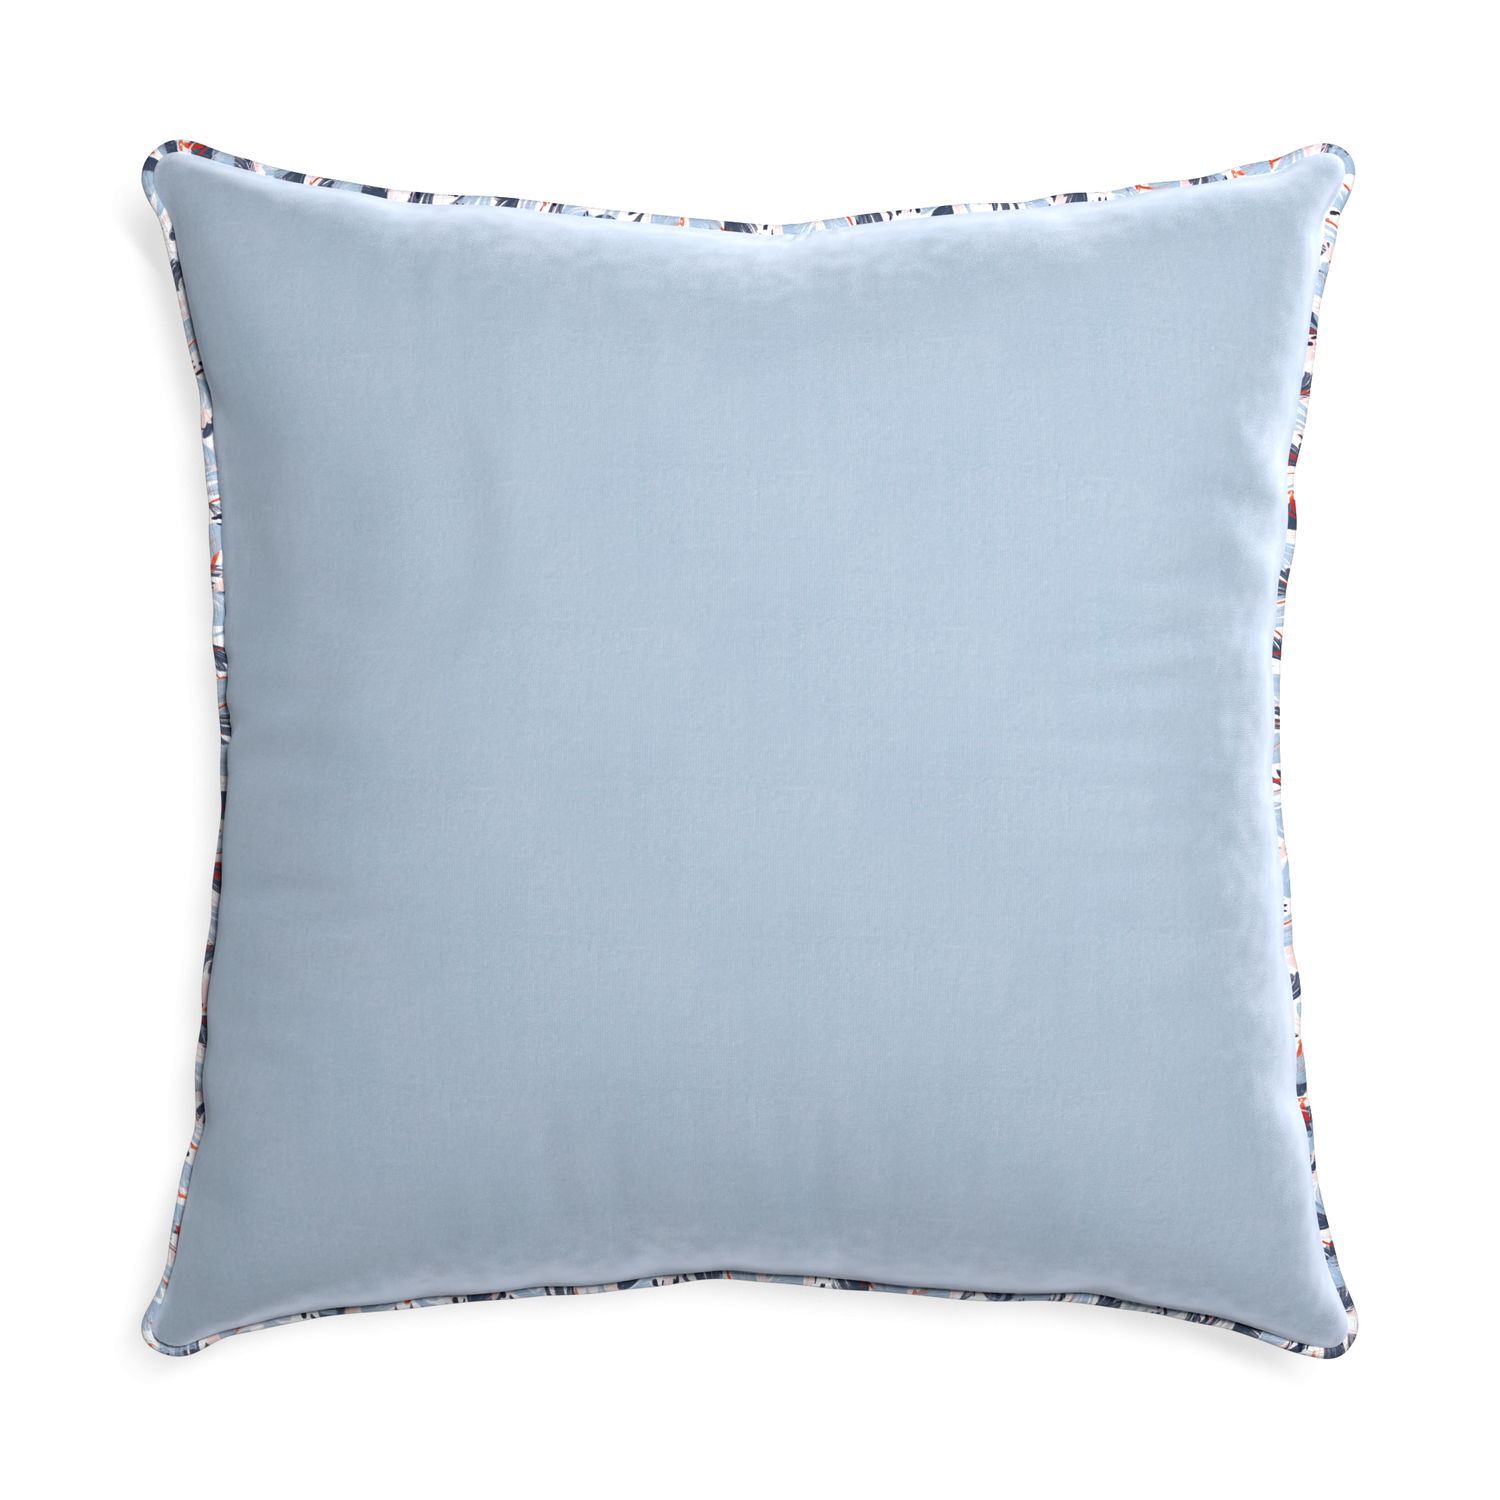 square light blue velvet pillow with red and blue piping